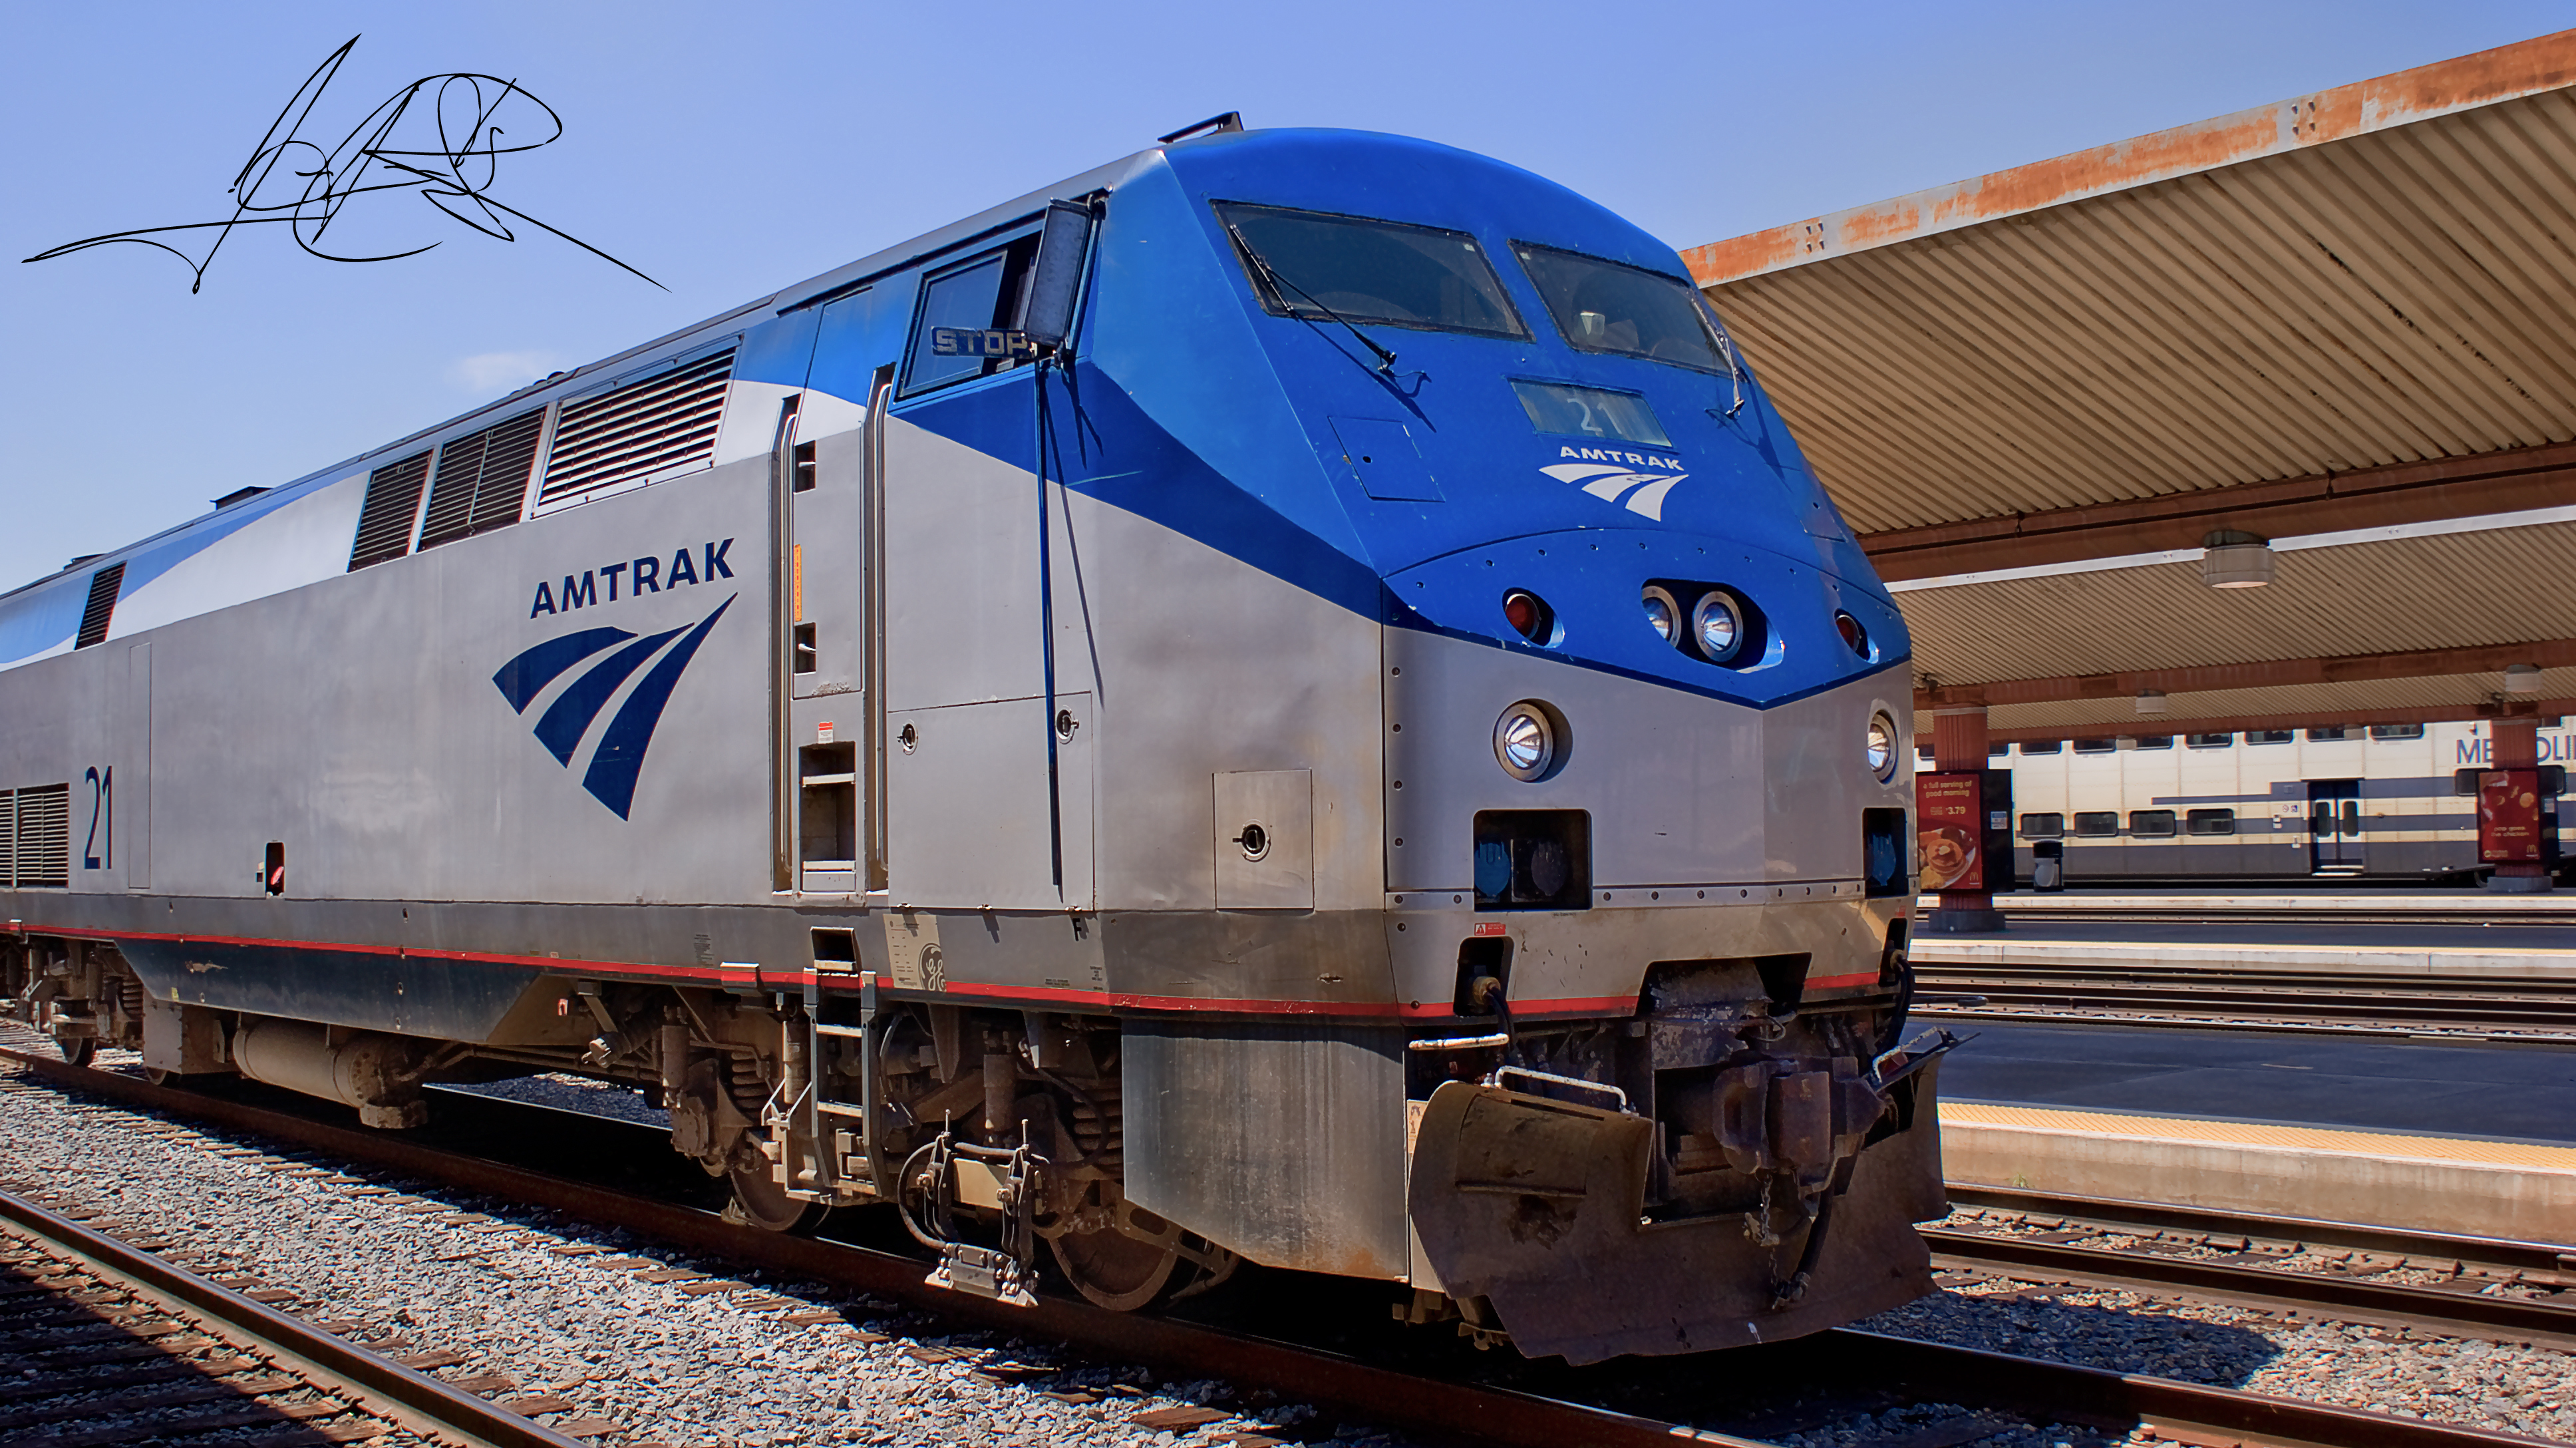 Amtrak at the LA Union Station | Tales from a Nut Shell cracked open